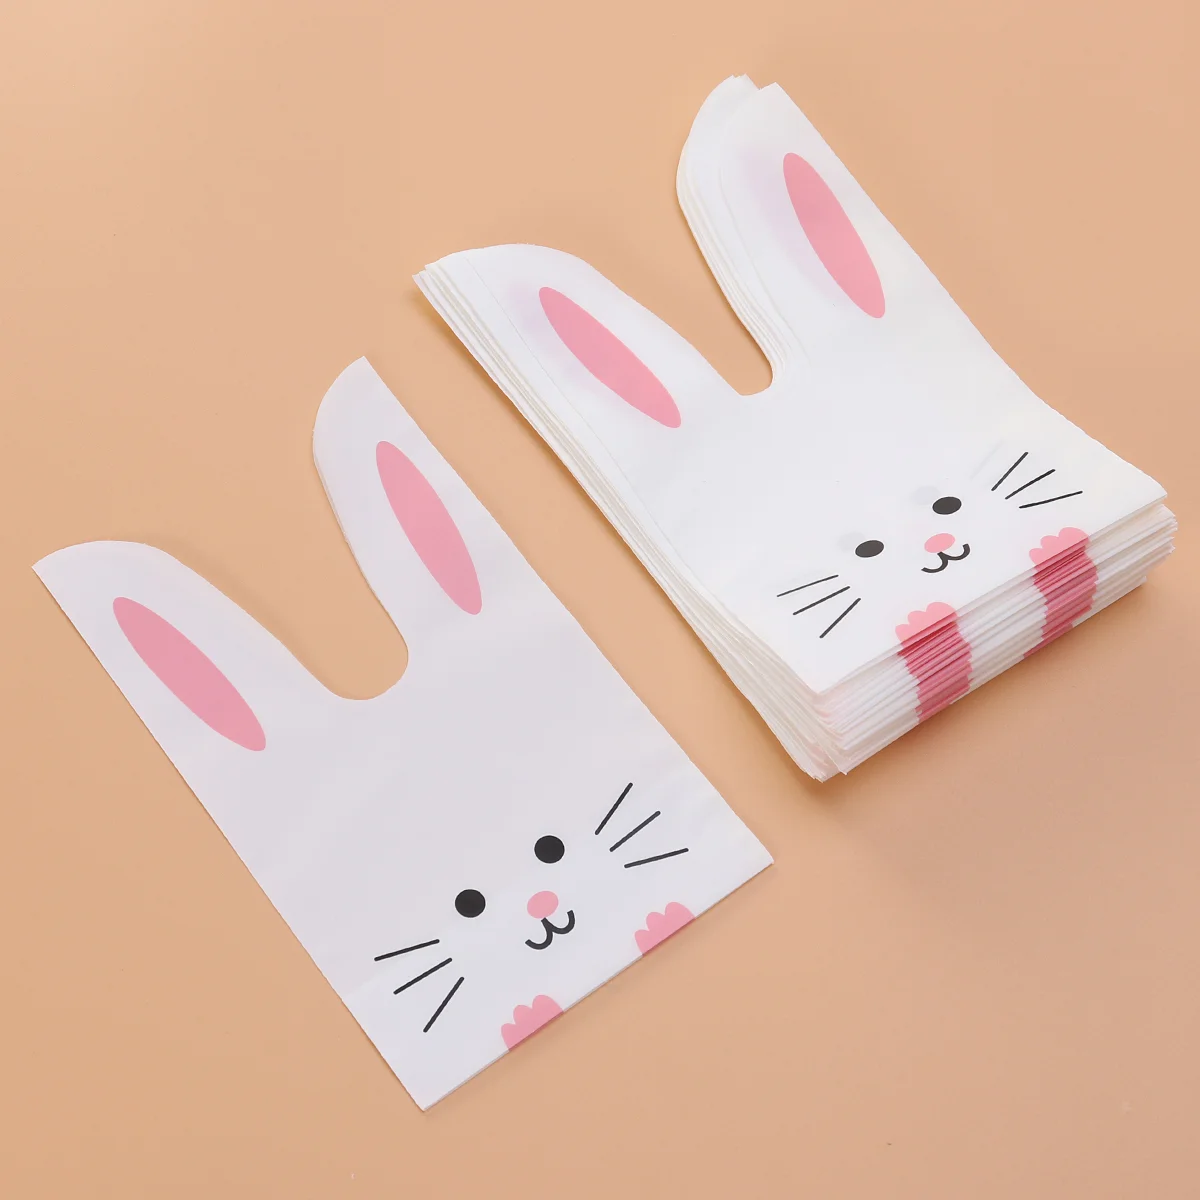 

Bunny Dessert Cookie Packing Store Cute Supplies Packaging Snack Easter Goodie Storage Decorative Biscuit Candy Cartoon Gift